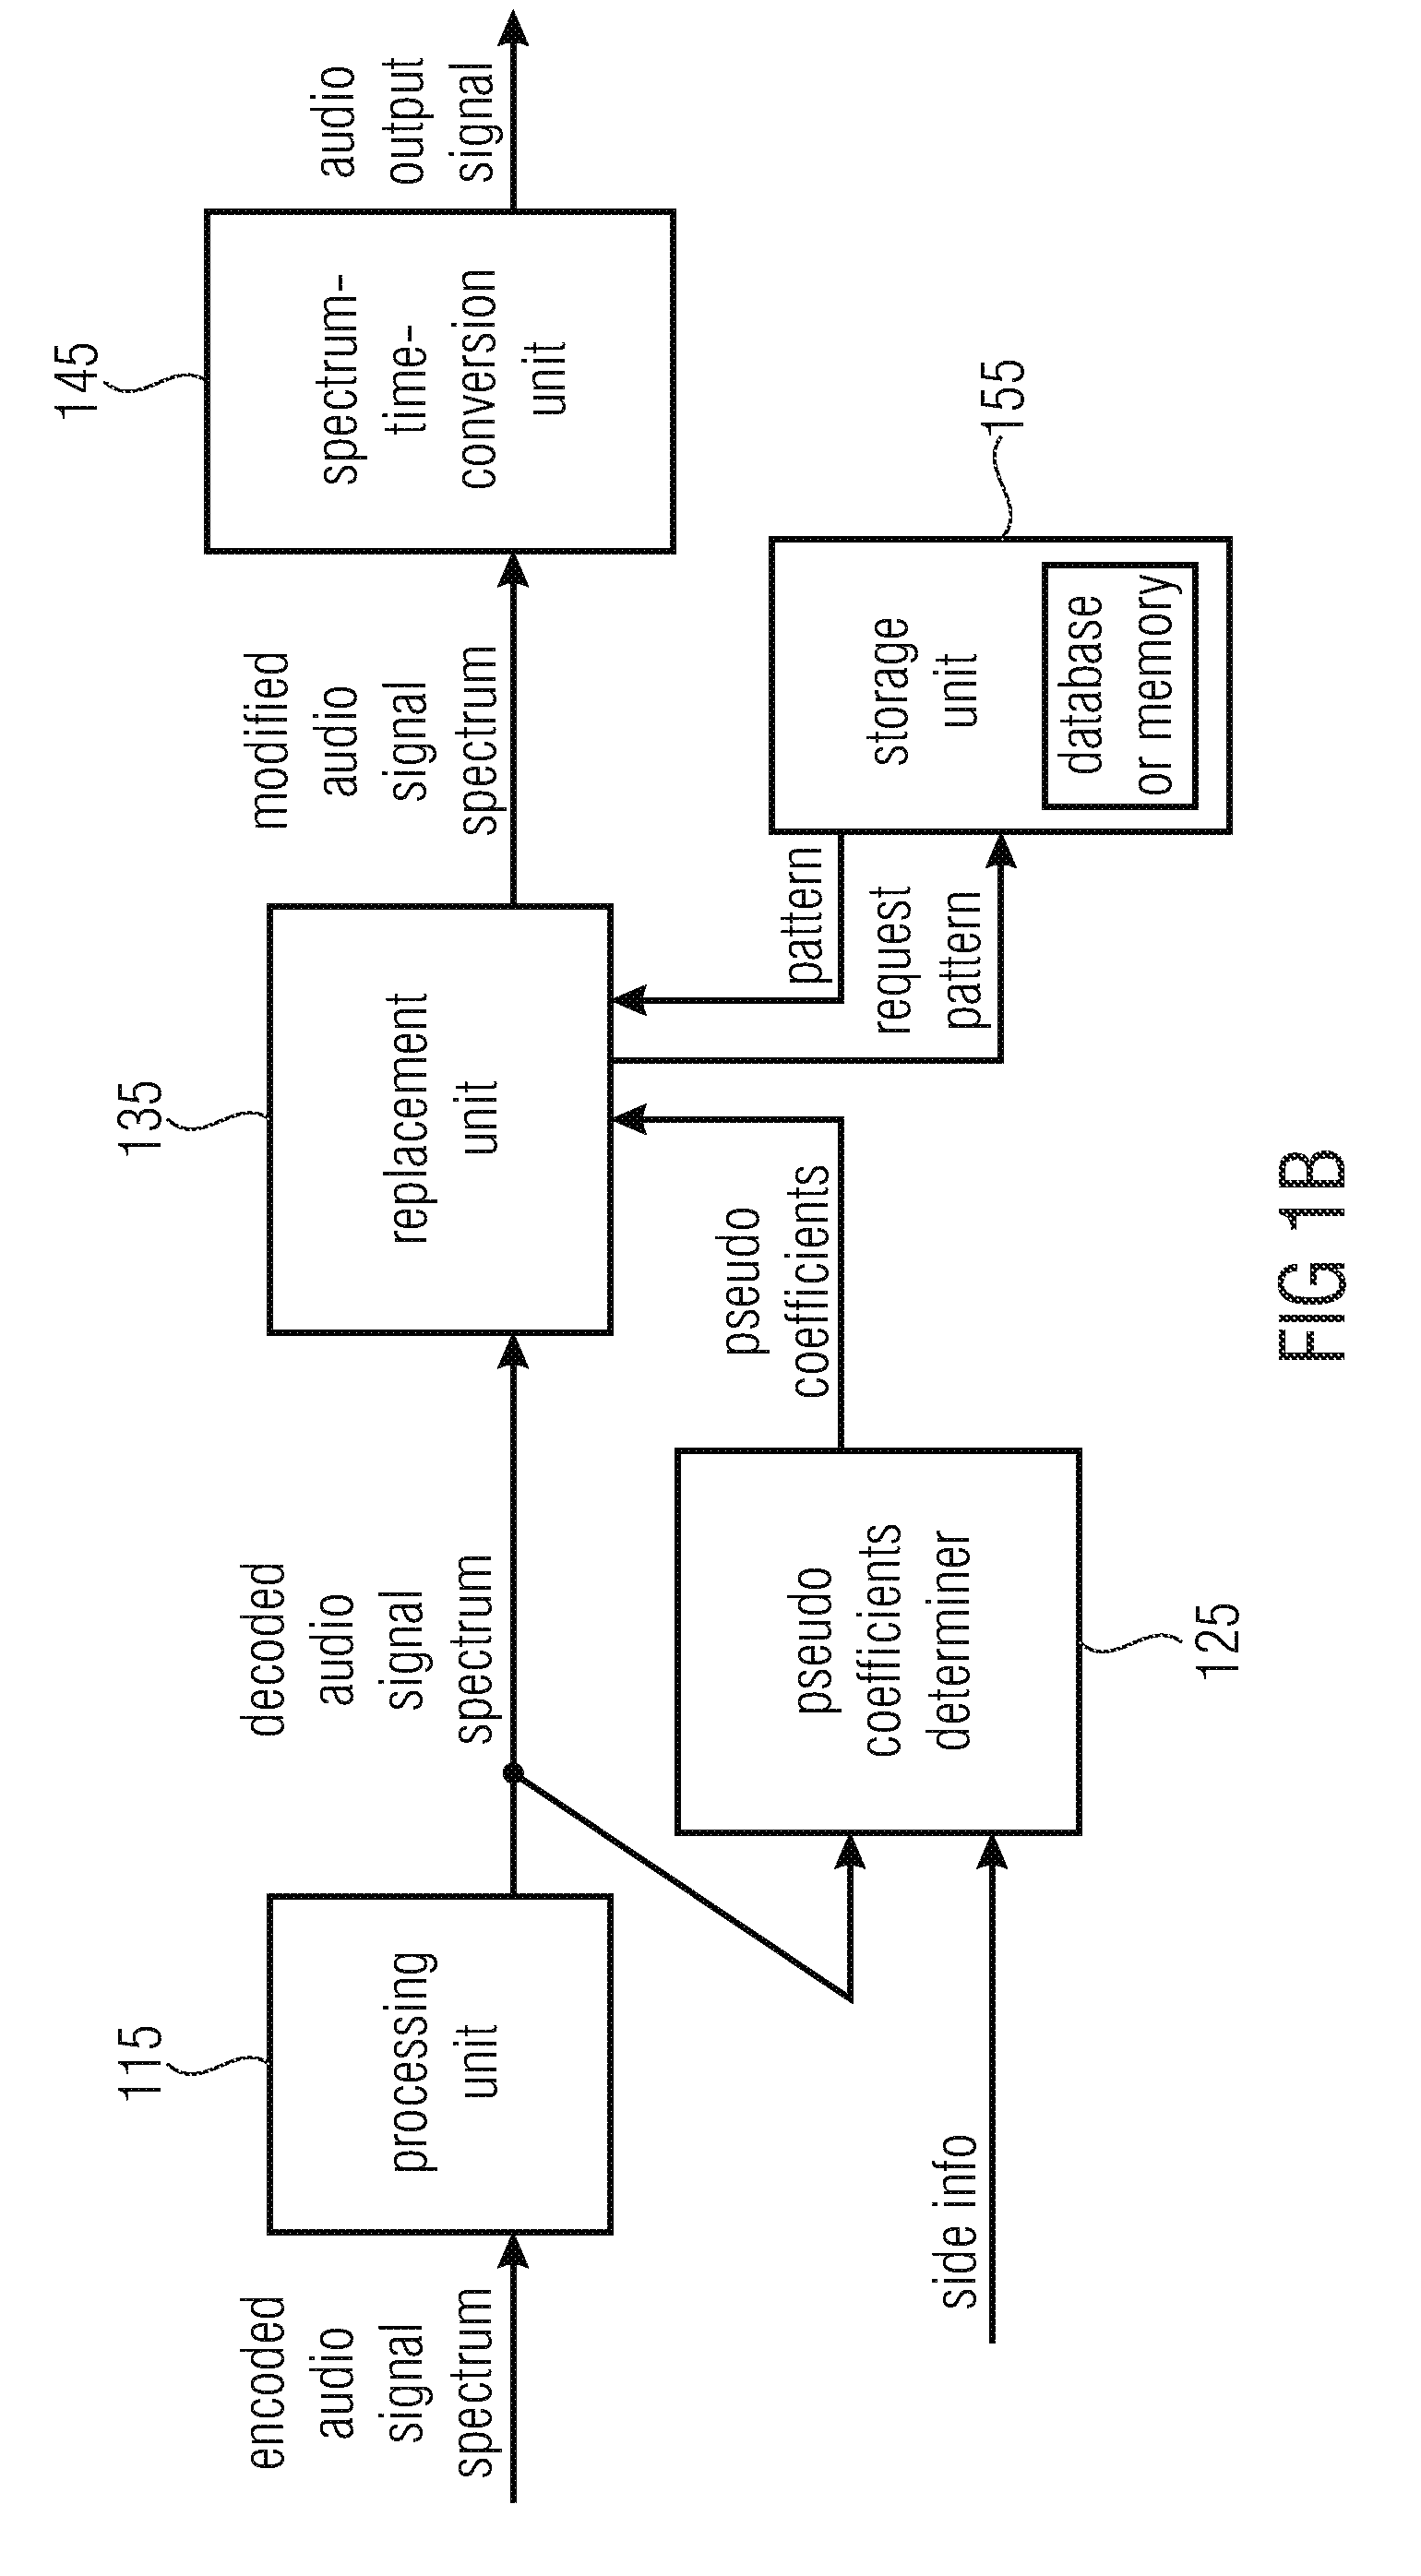 Apparatus and method for efficient synthesis of sinusoids and sweeps by employing spectral patterns